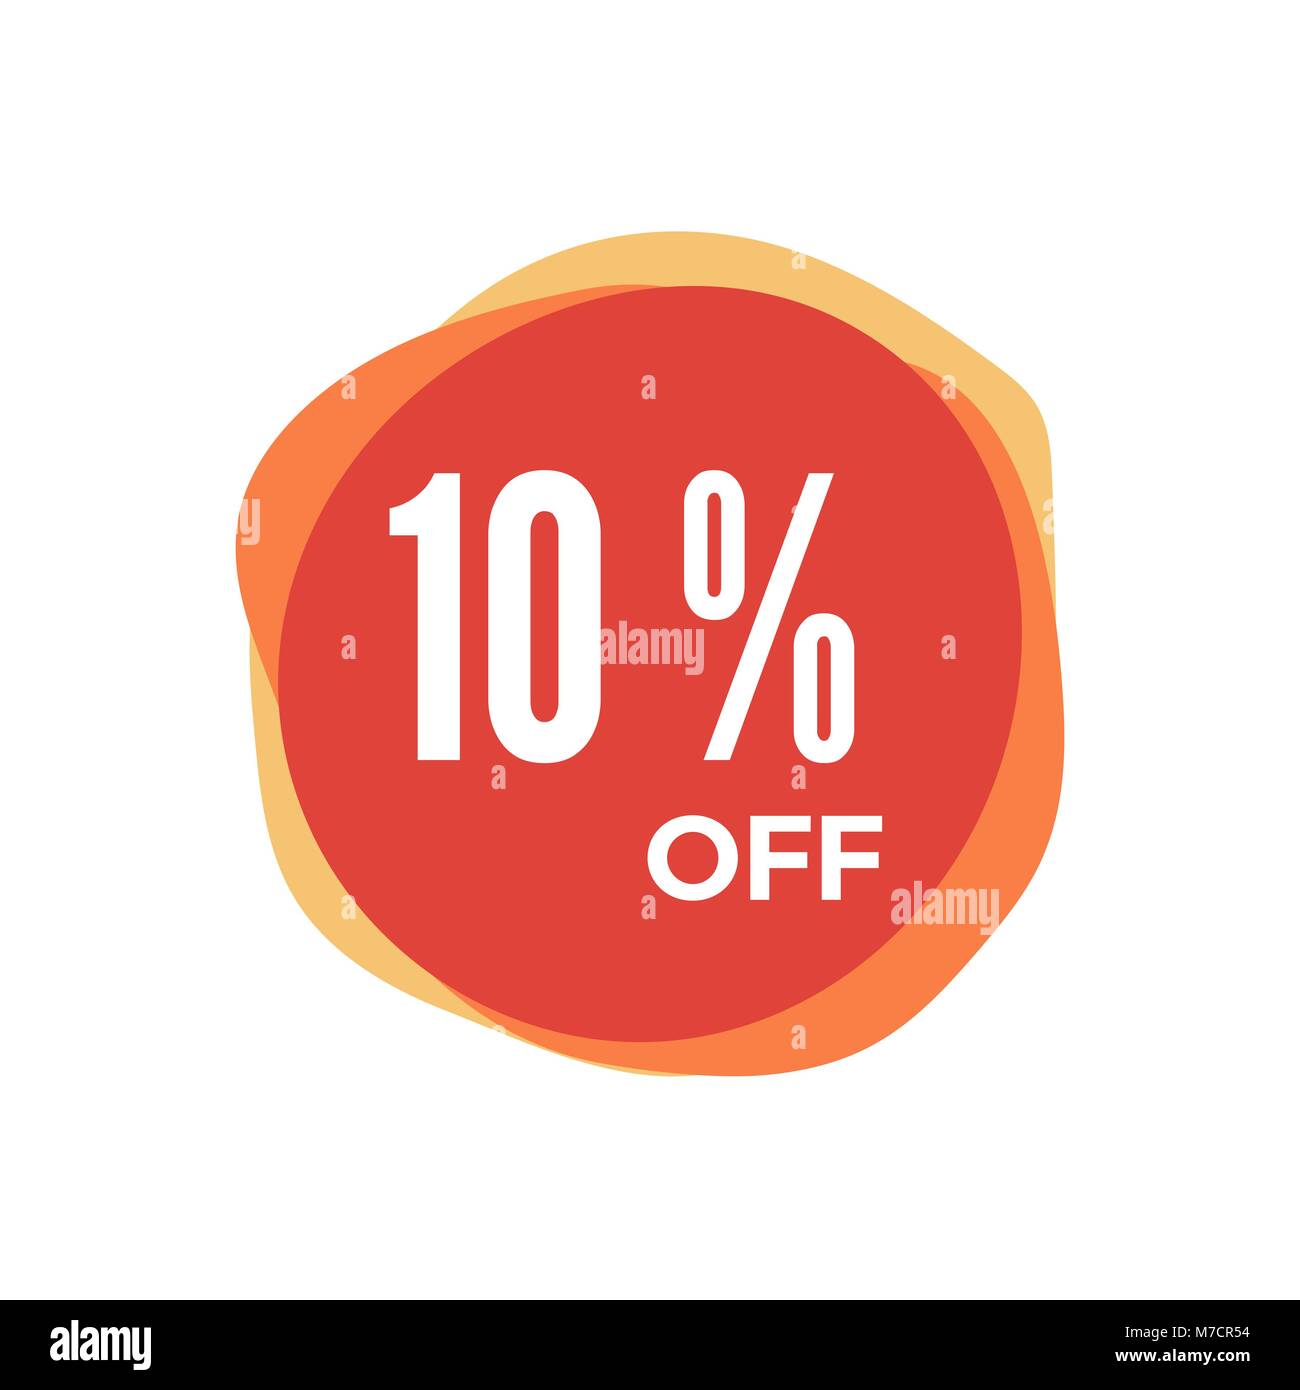 10 Percent Off Discount Sticker. Sale red tag Isolated on white background. Discount Offer Price Label. Vector Illustration Stock Vector